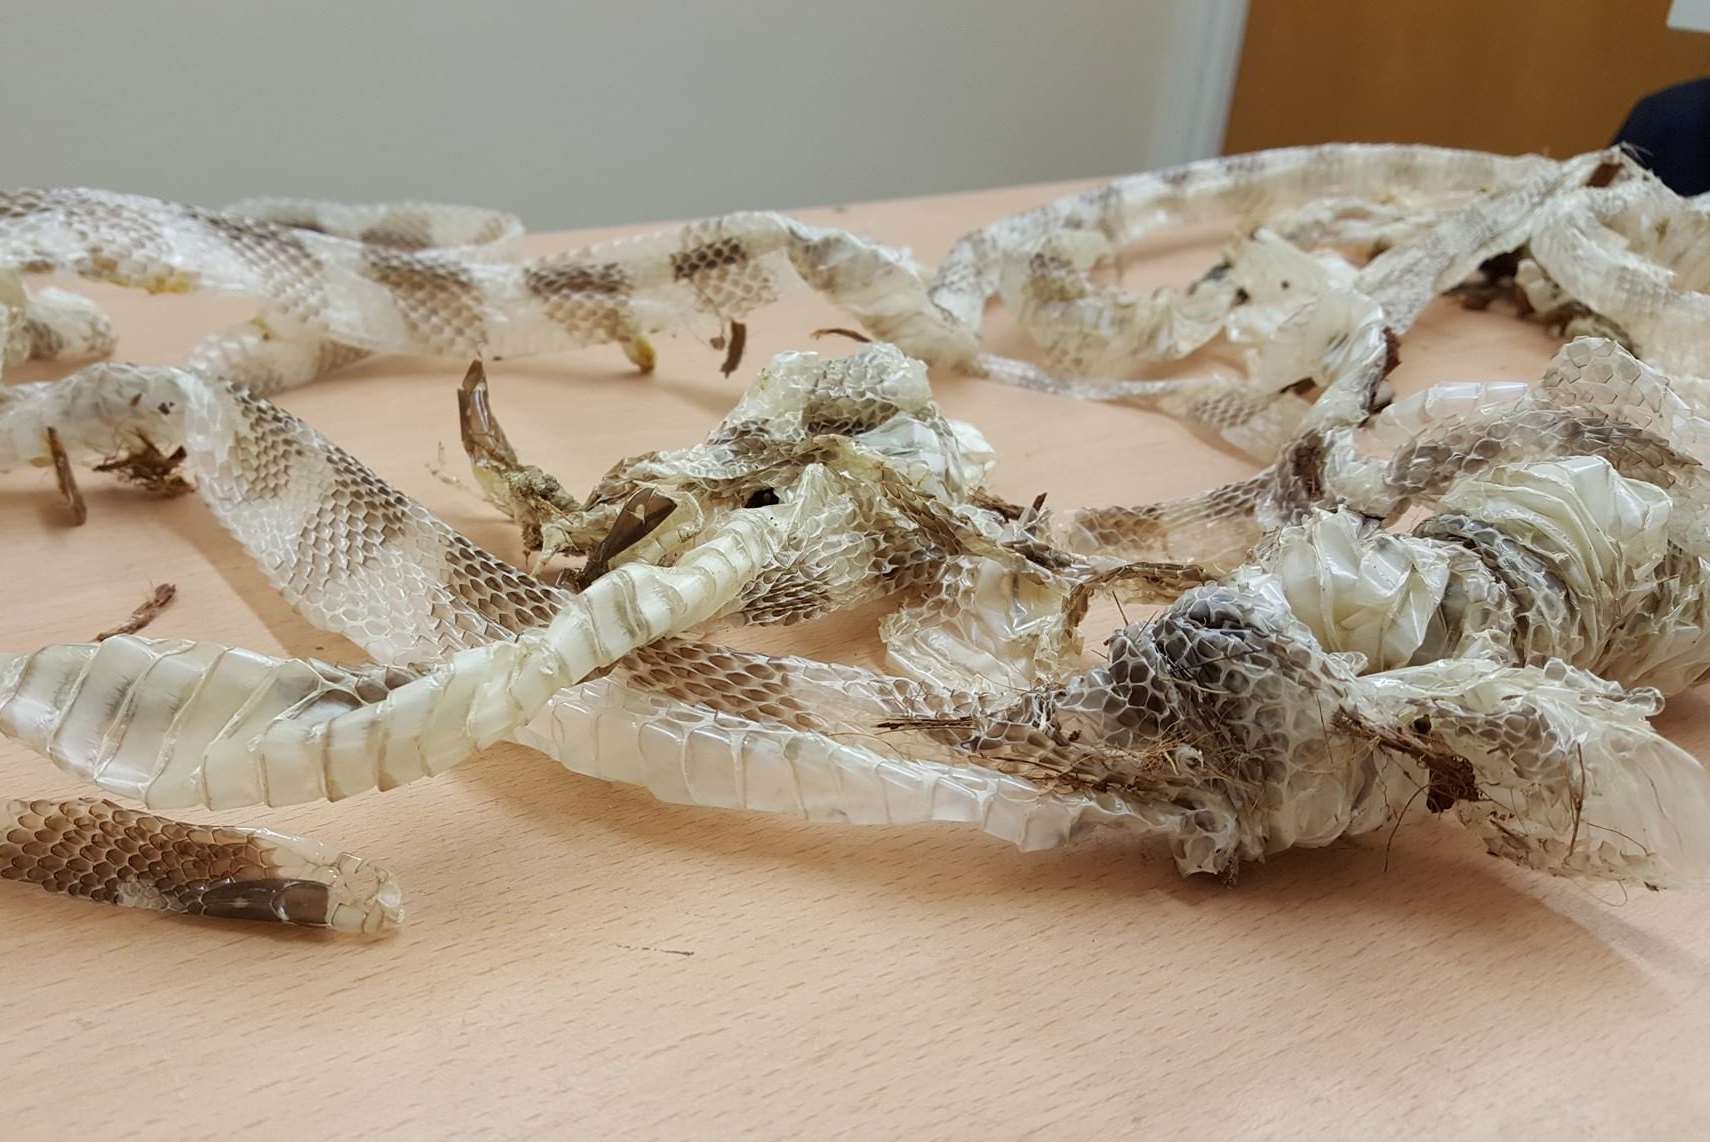 There were around five shed skins in the vivarium. Pic: RSPCA